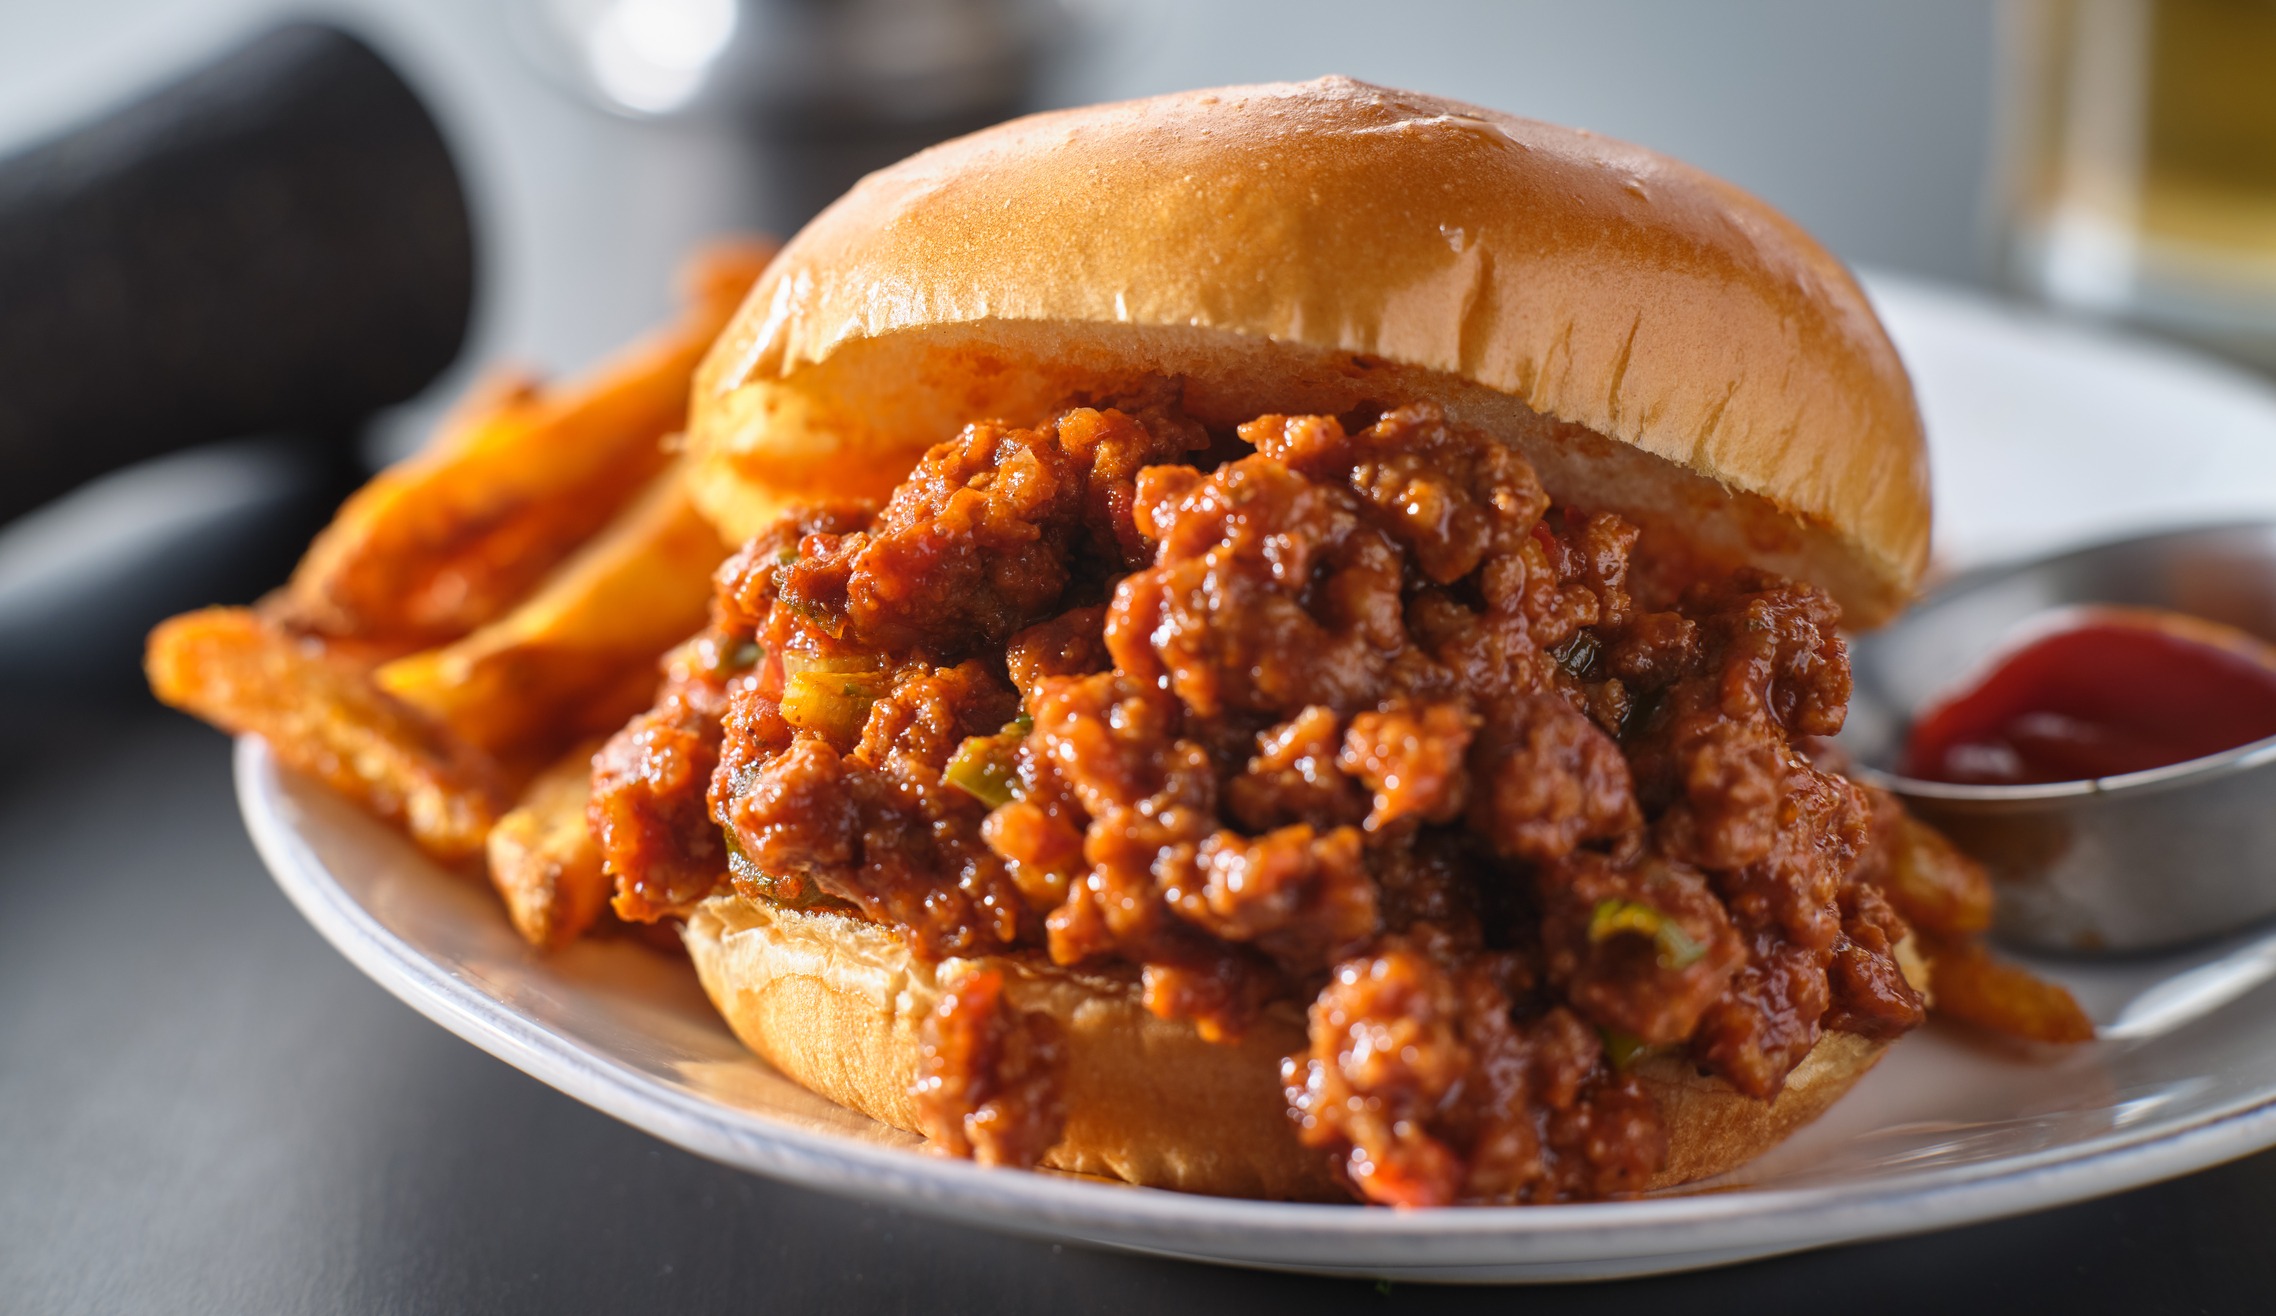 sloppy joe sandwich on plate with french fries and ketchup 1864686251